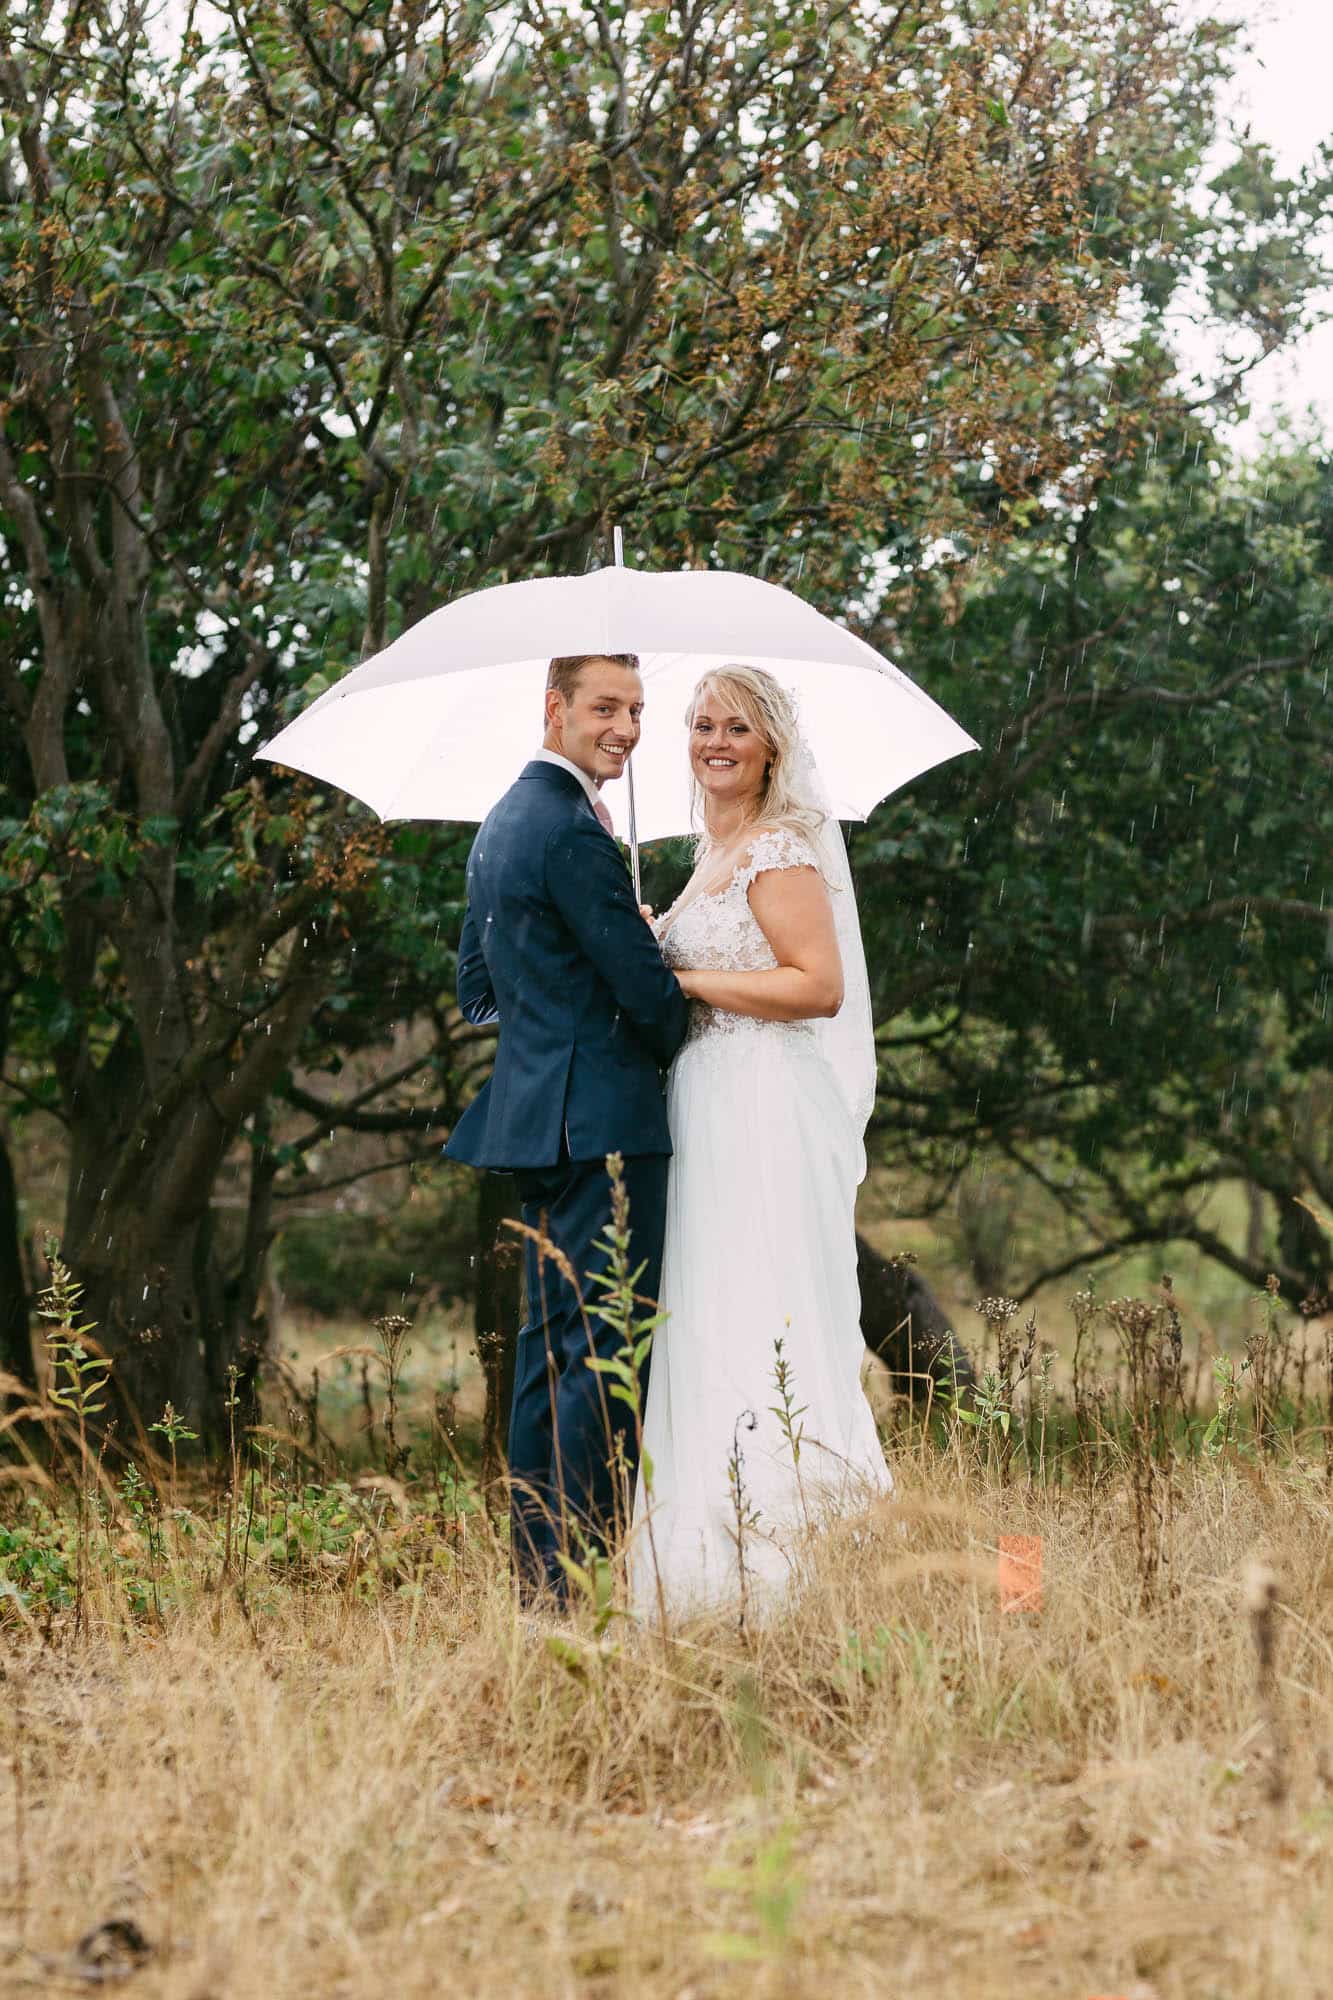 A bride and groom stand under an umbrella in a field.